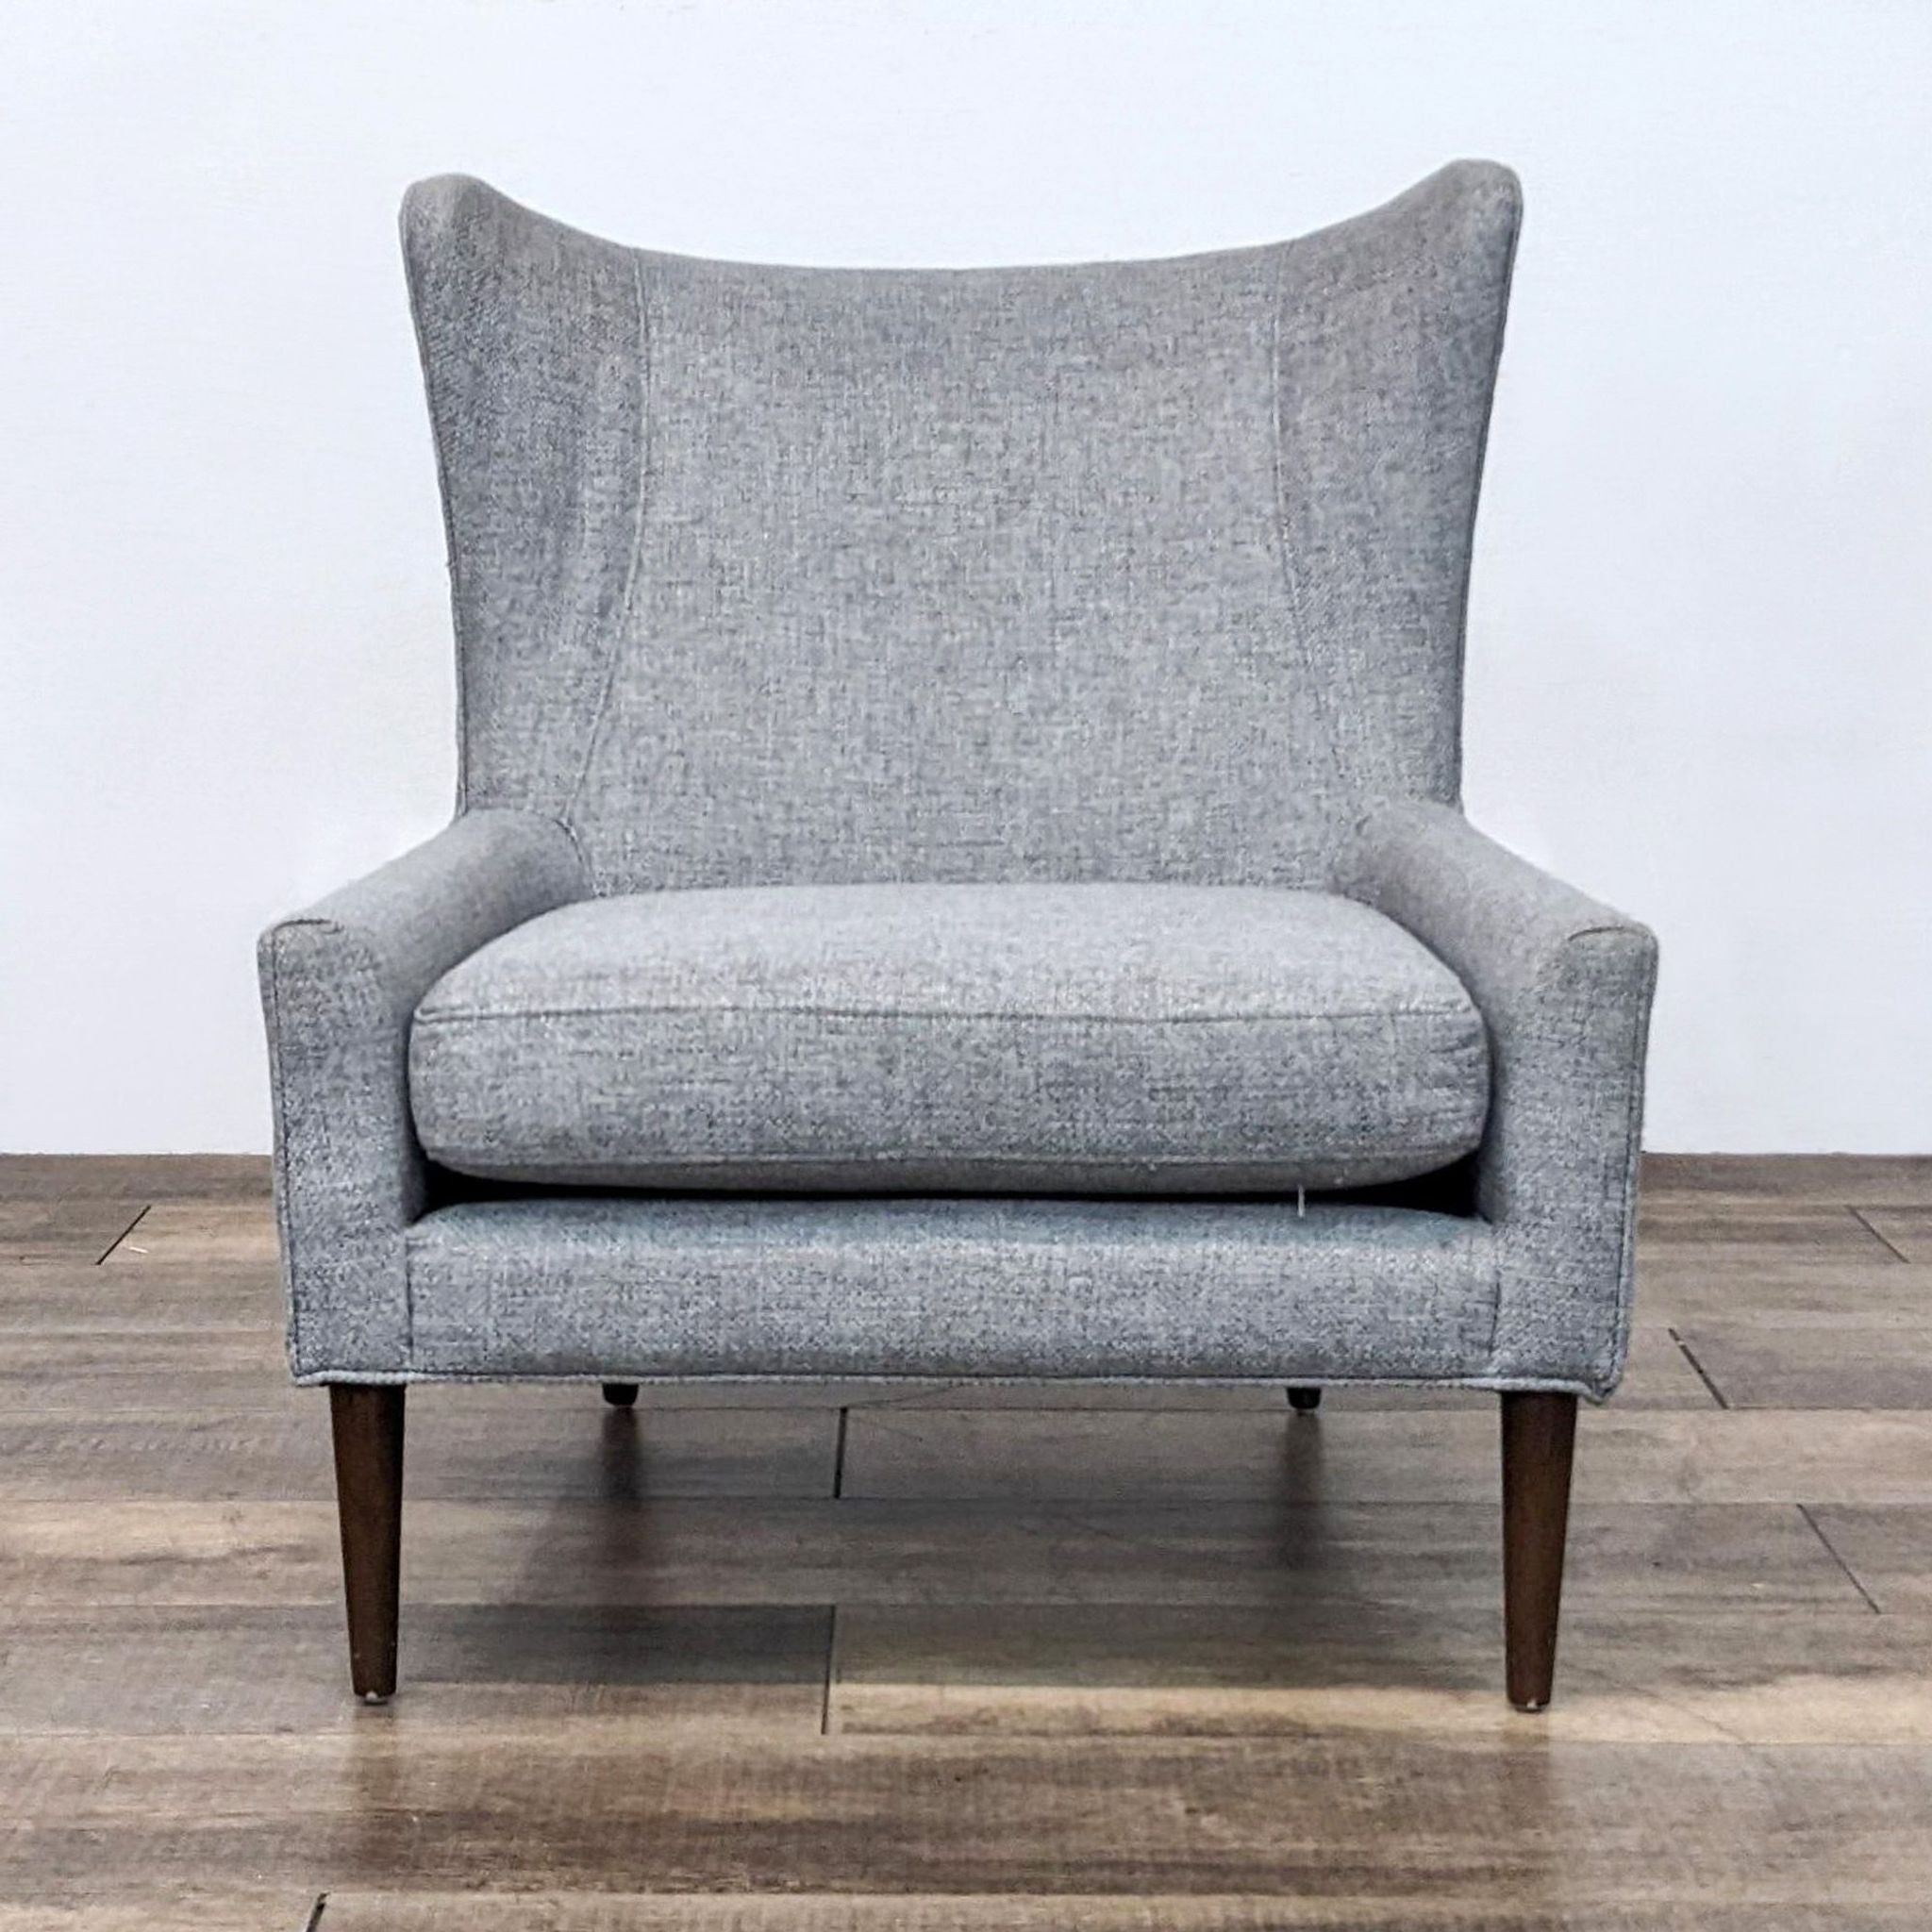 Modern Marlow chair by Four Hands, showcasing sleek lines with a high back, wing chair design, and tapered wood legs.